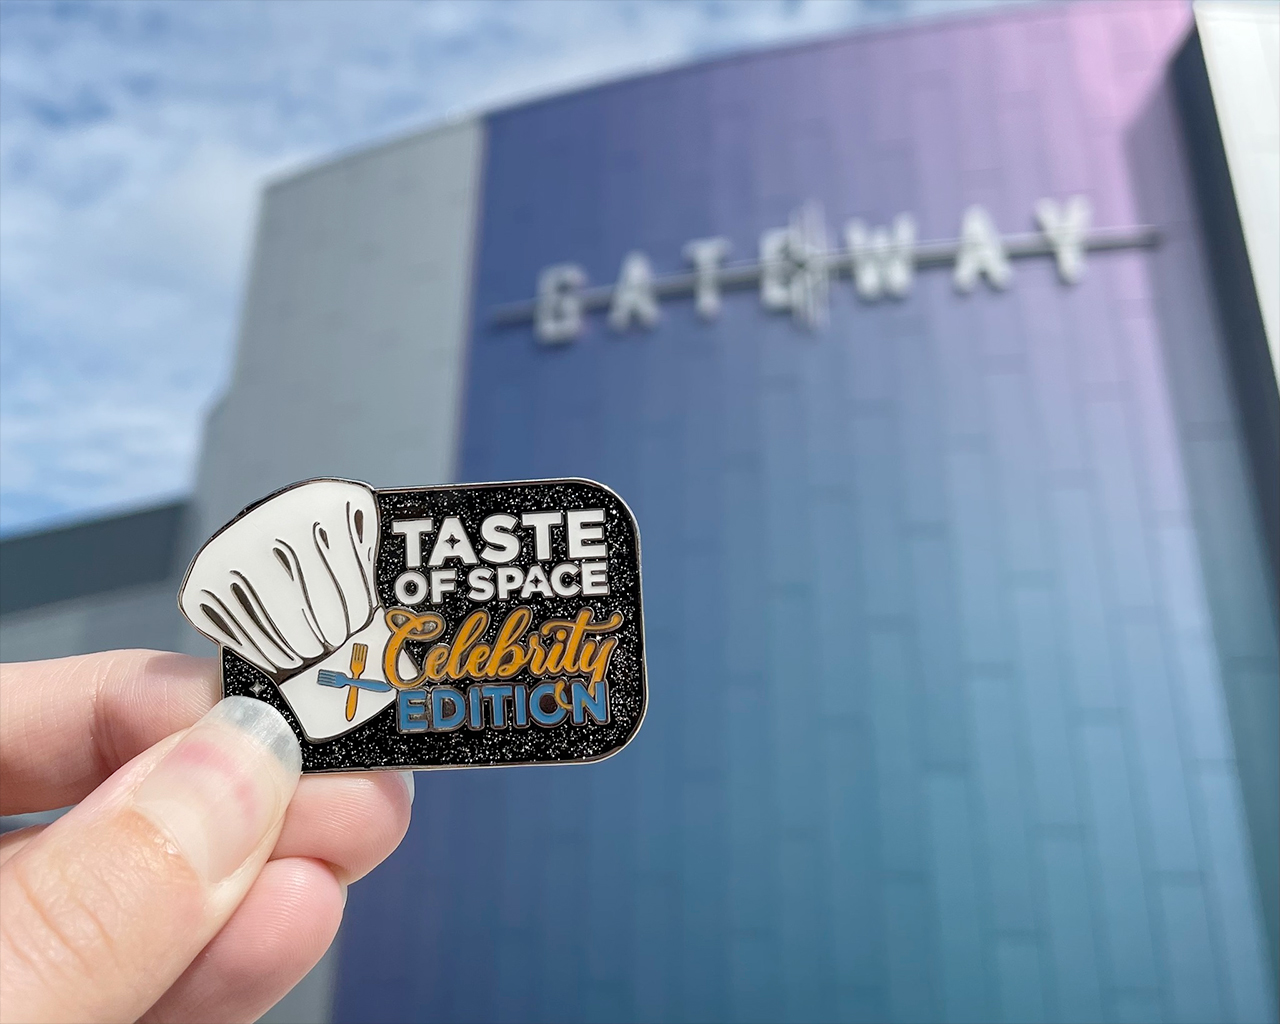 Guests who attend Taste of Space: Celebrity Chef will receive a special pin.